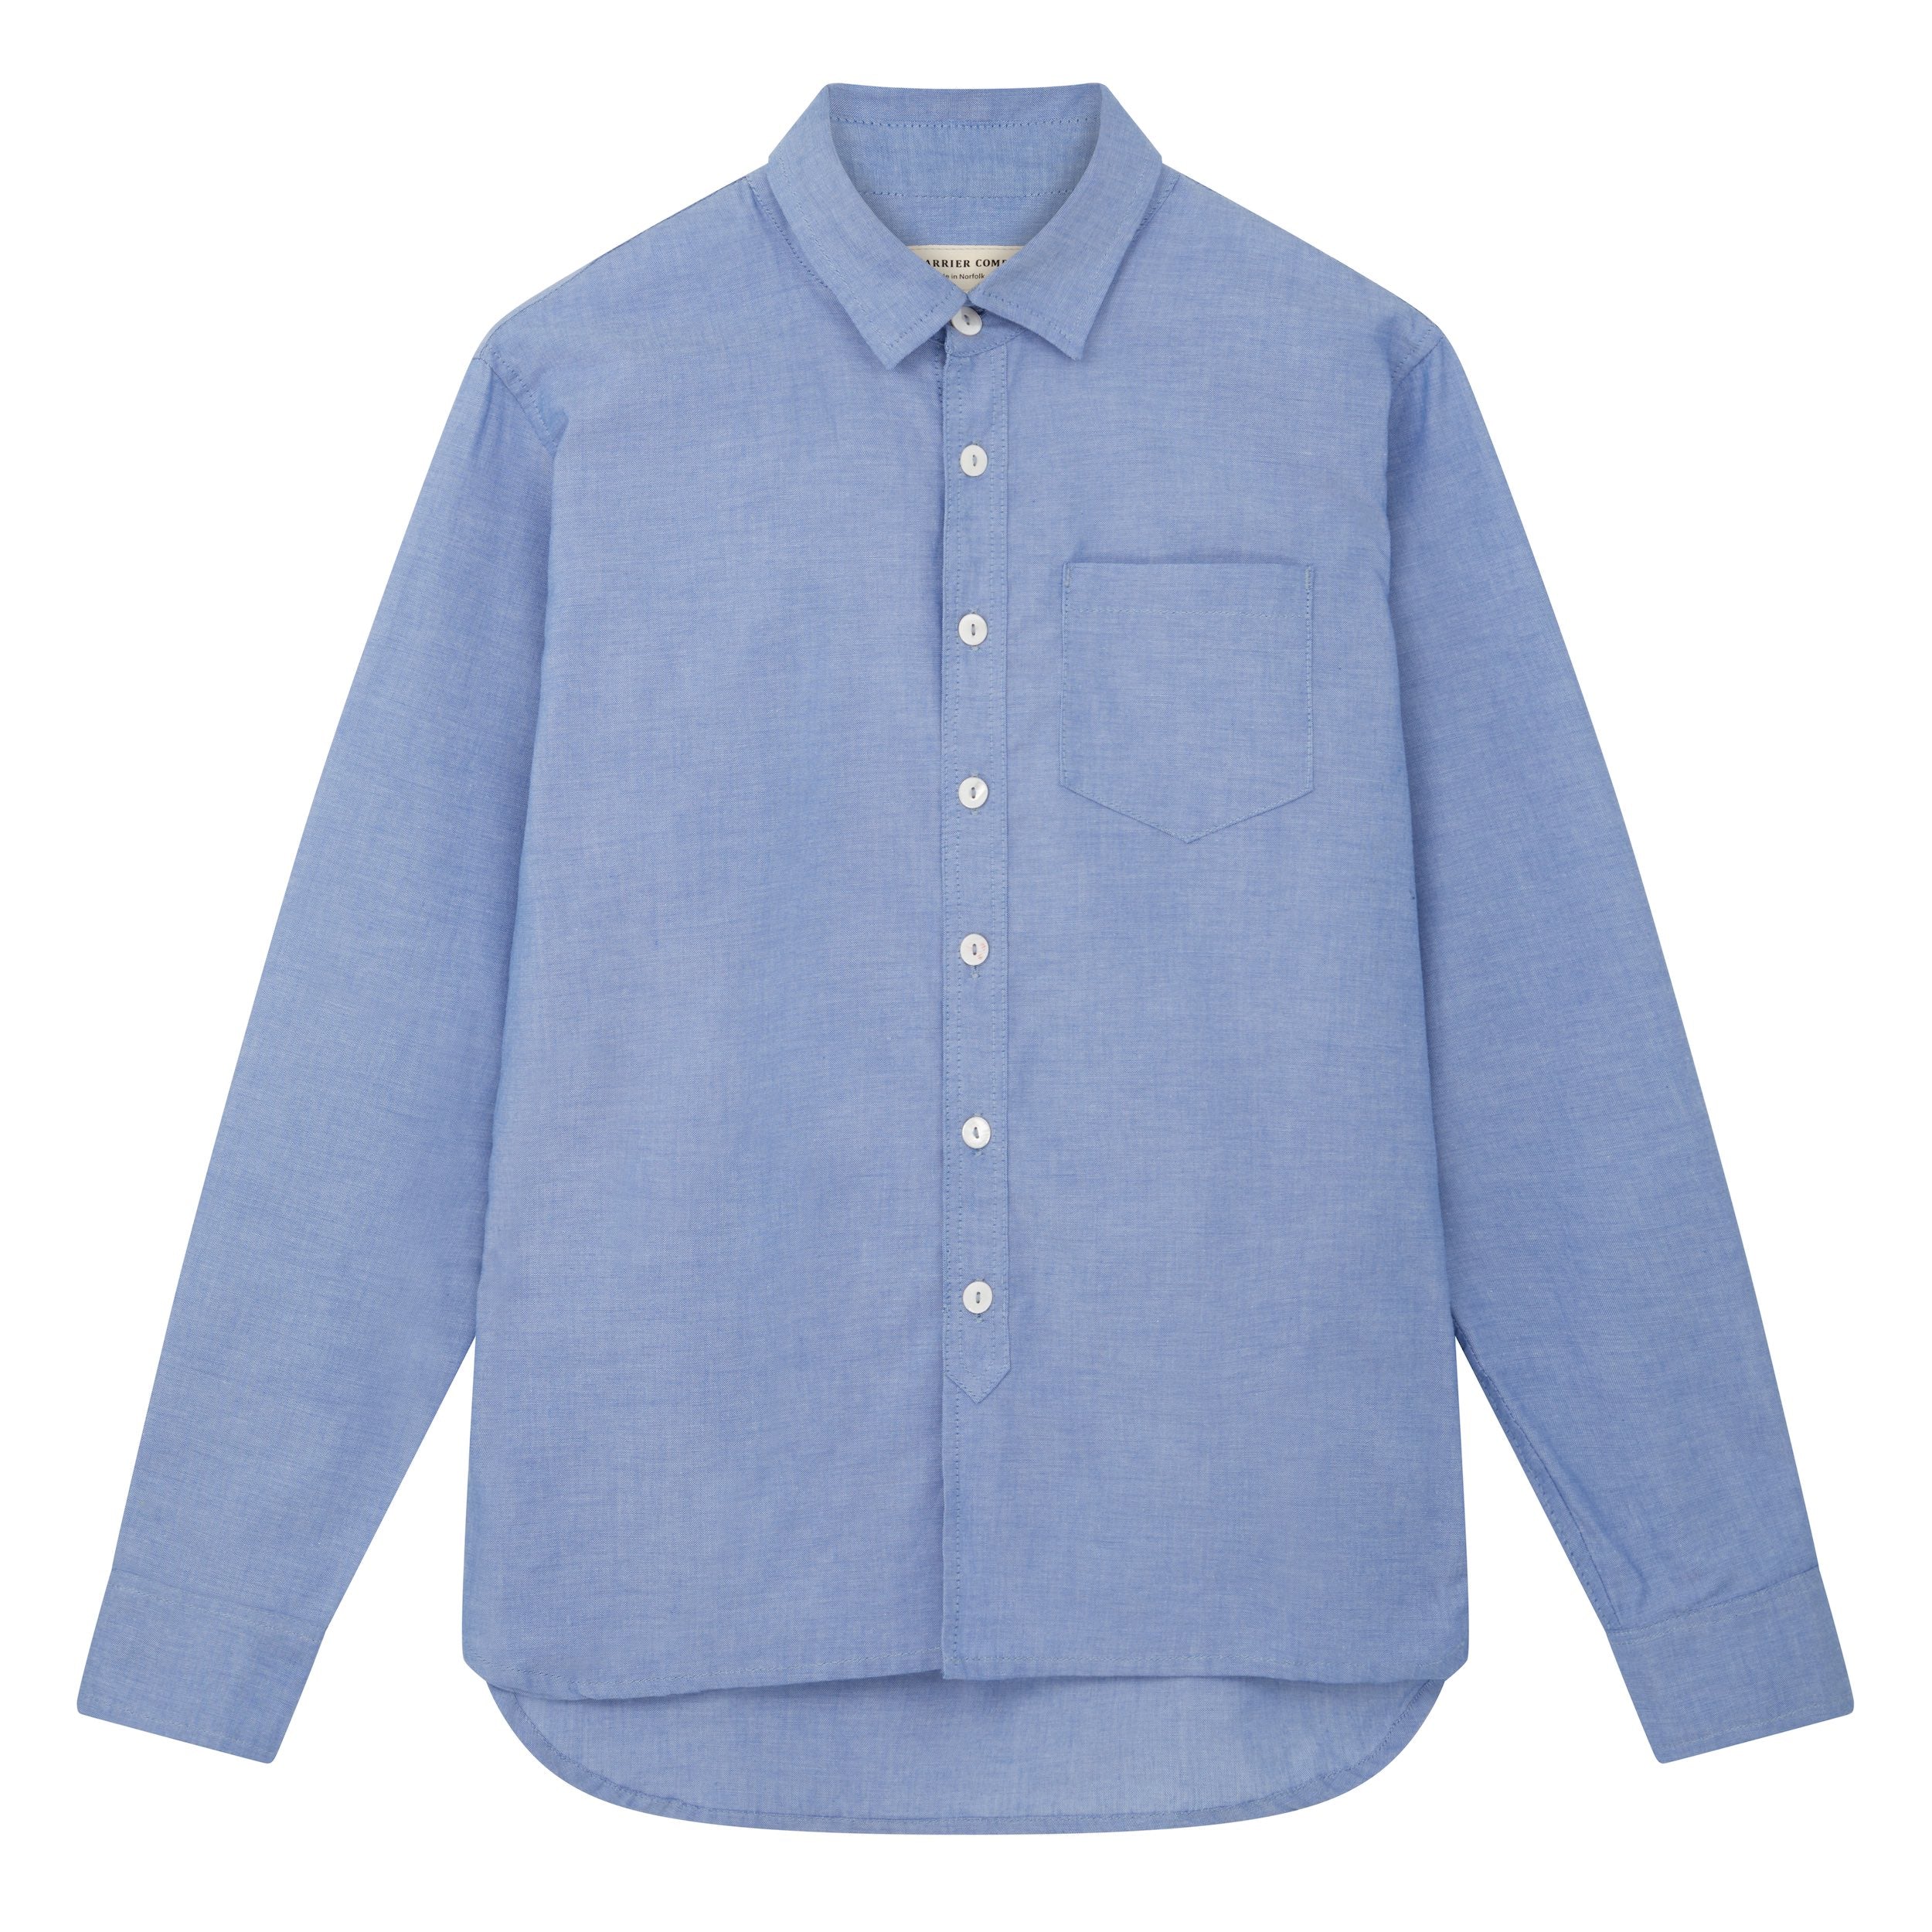 Carrier Company Pinpoint Chambray Shirt